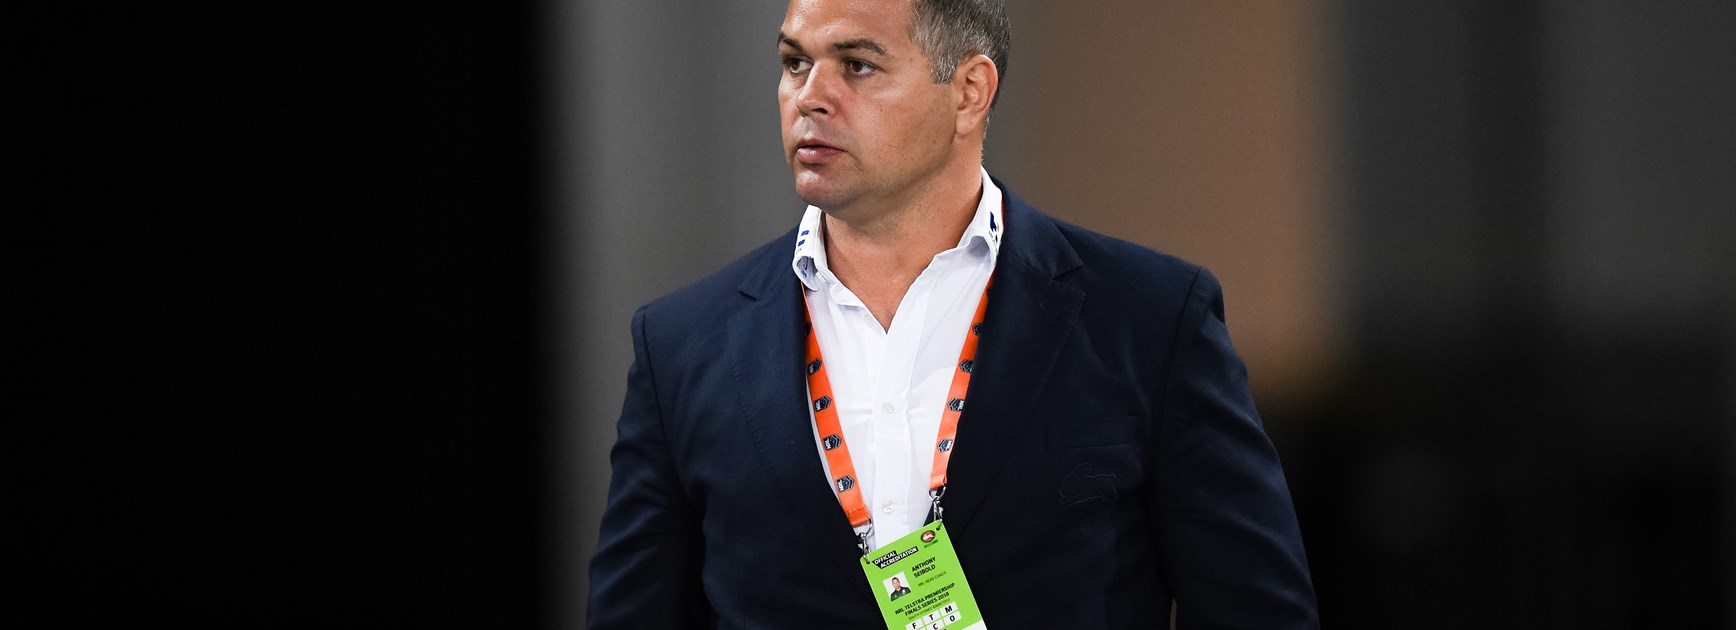 Renouf: Seibold can lead this Brisbane team to title